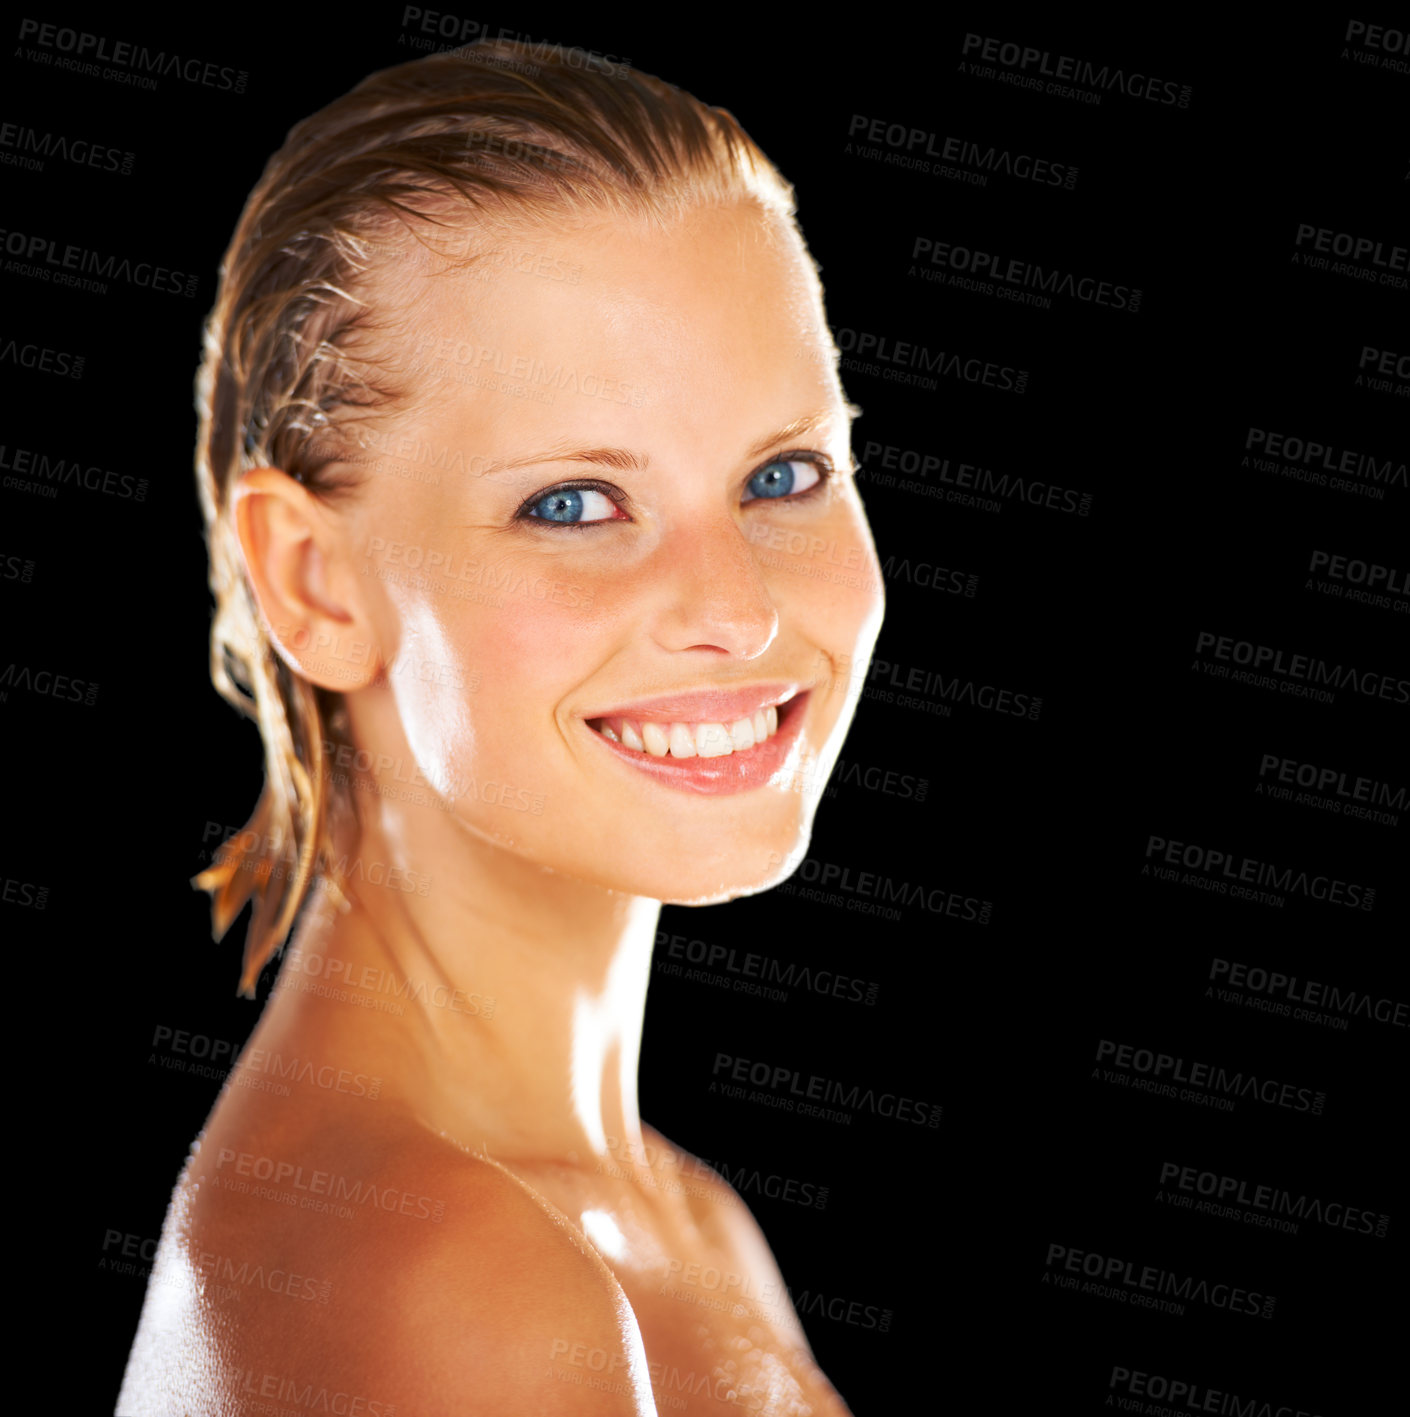 Buy stock photo Skincare, happy and portrait of woman on black background for wellness, grooming and beauty. Dermatology, luxury spa and face of person smile with wet hair for shower, washing and cleaning in studio